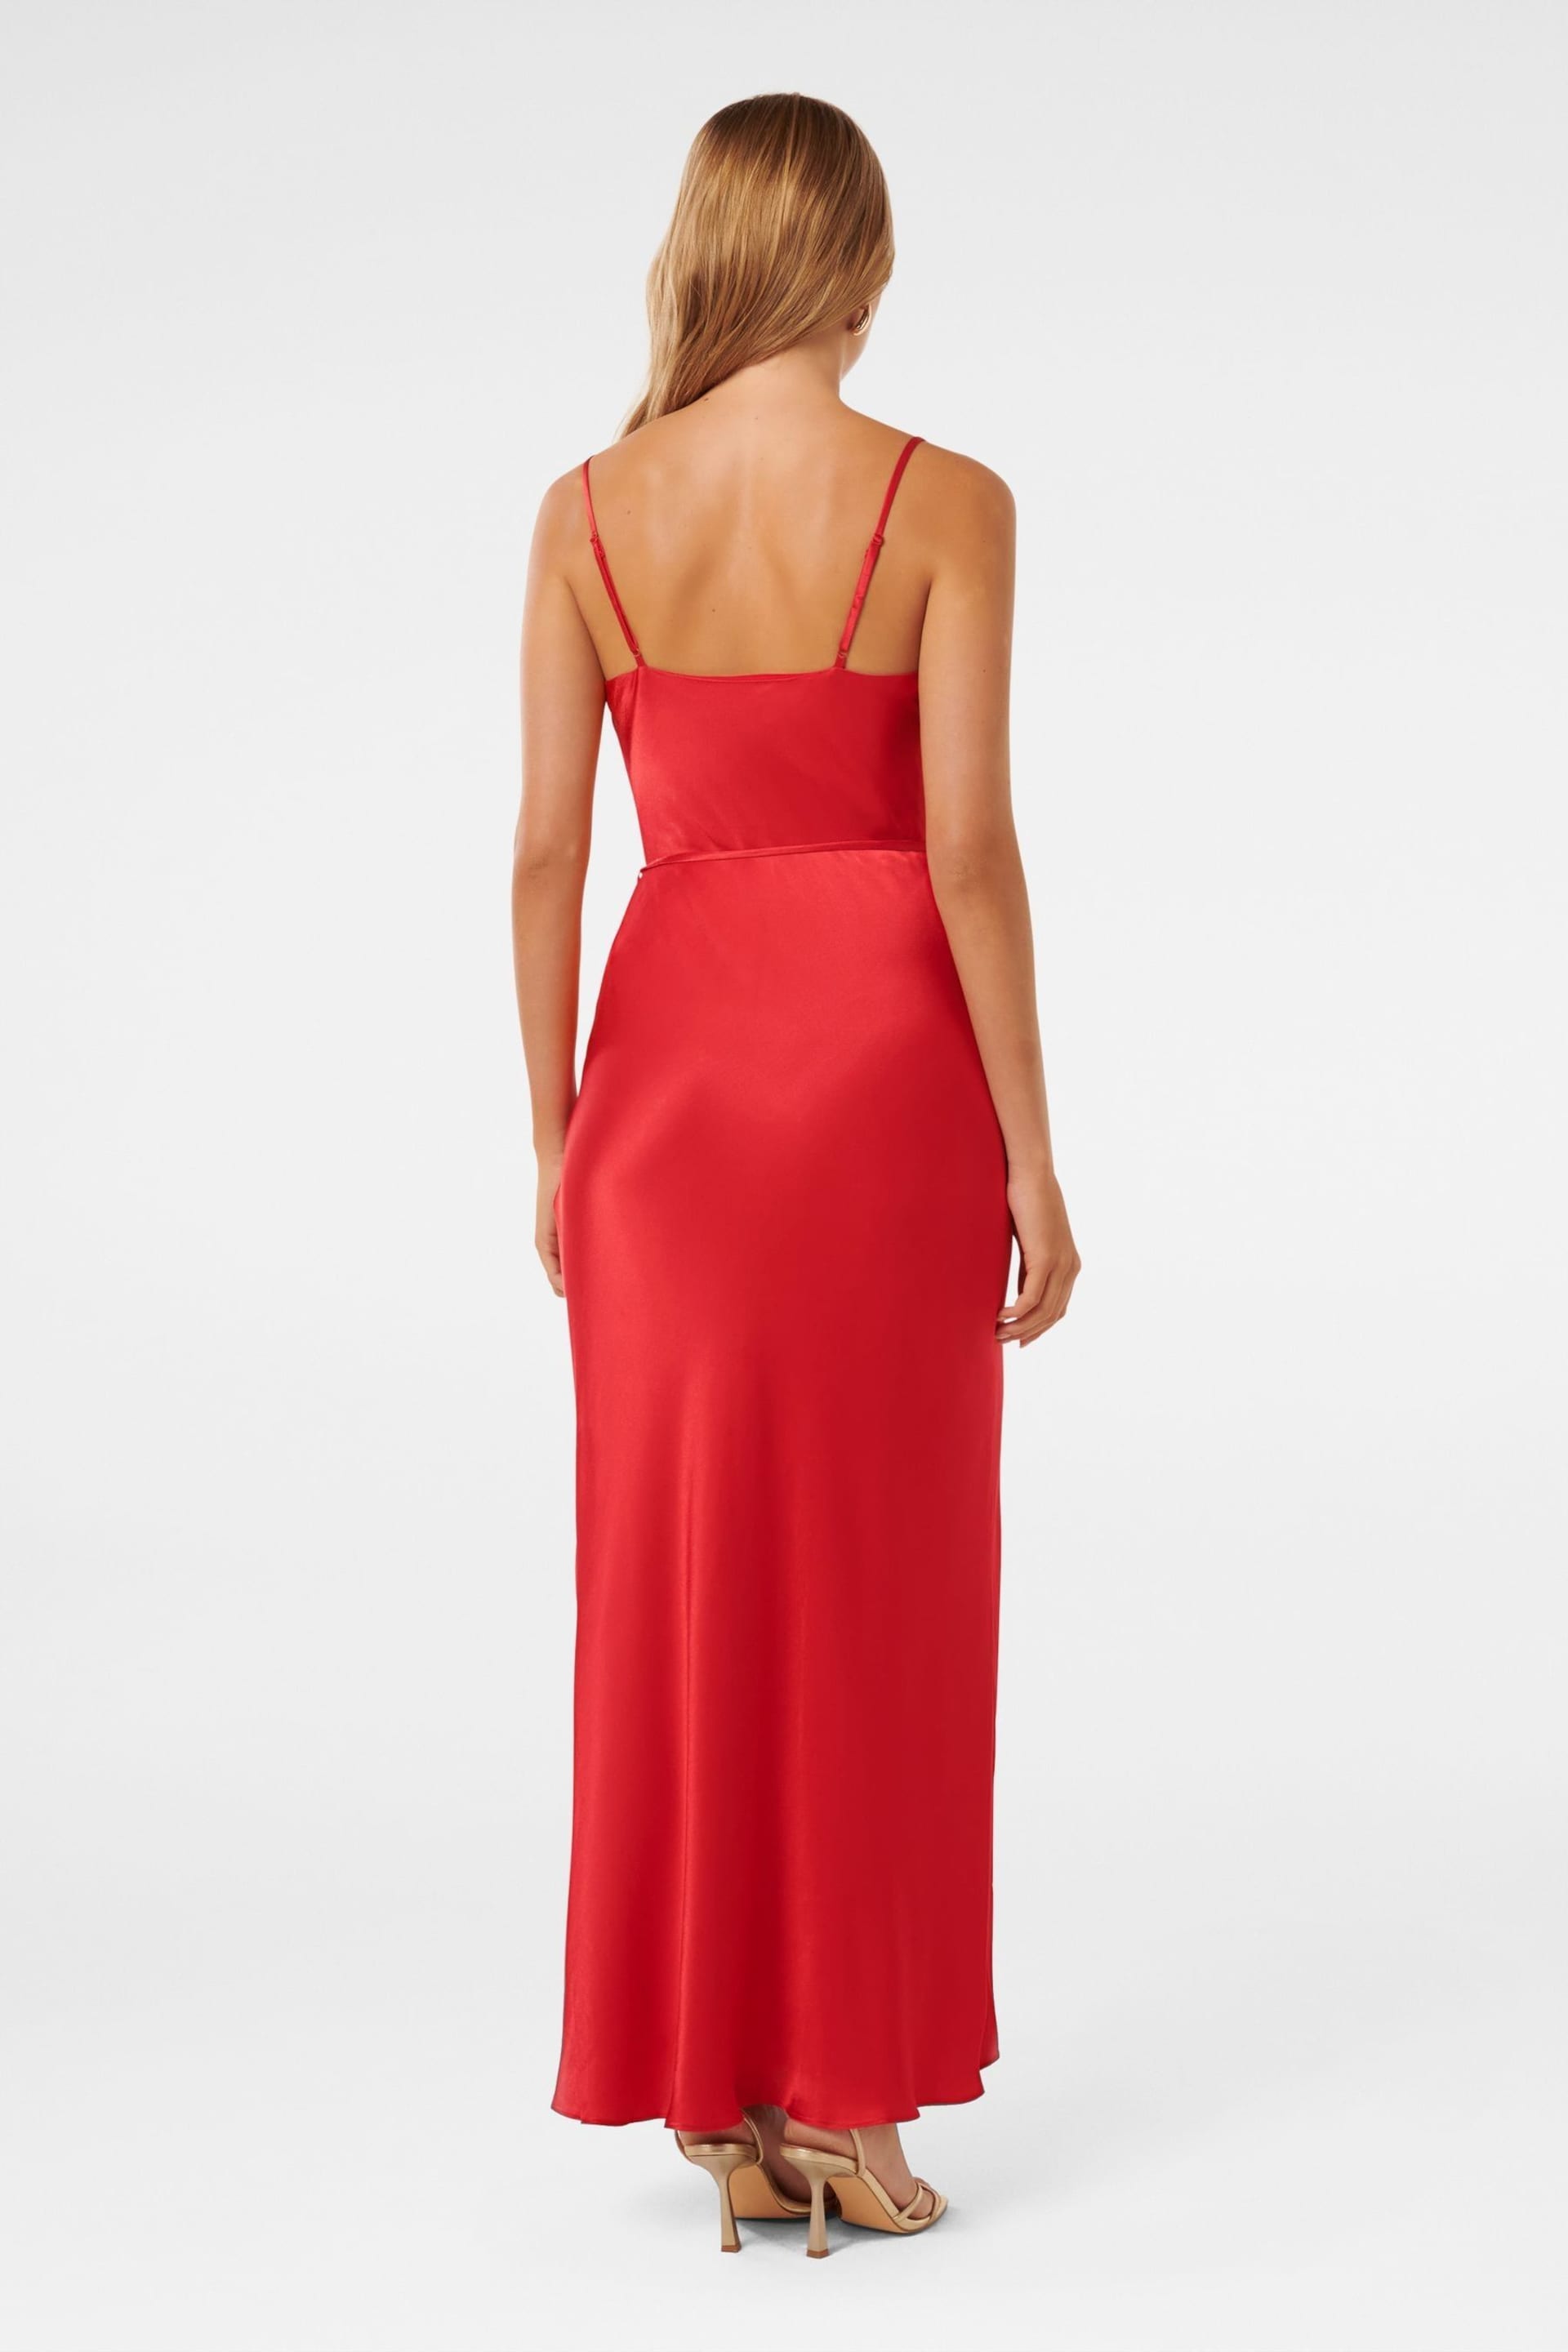 Forever New Red Lucy Satin Cowl Neck Maxi Dress - Image 4 of 4